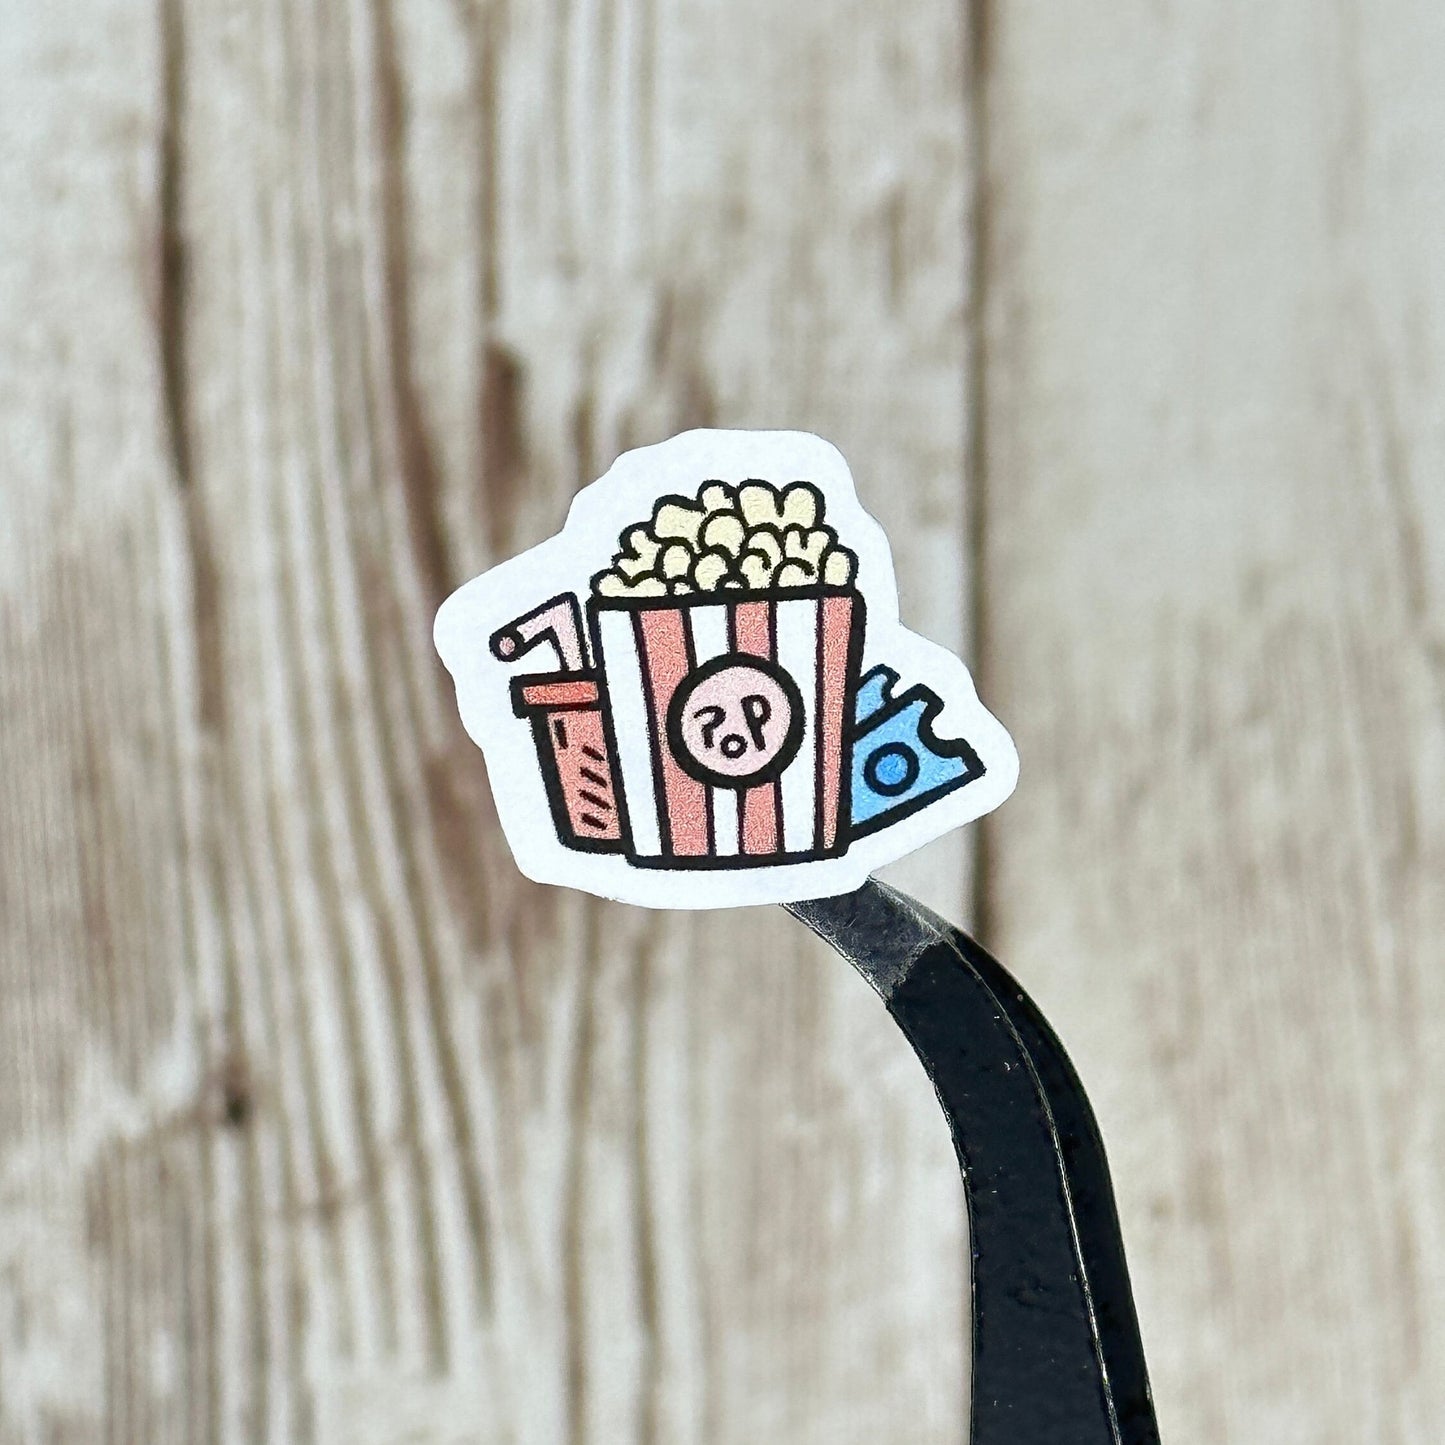 Movie Popcorn Planner Stickers for Planners Journals Agendas and Scrapbooking